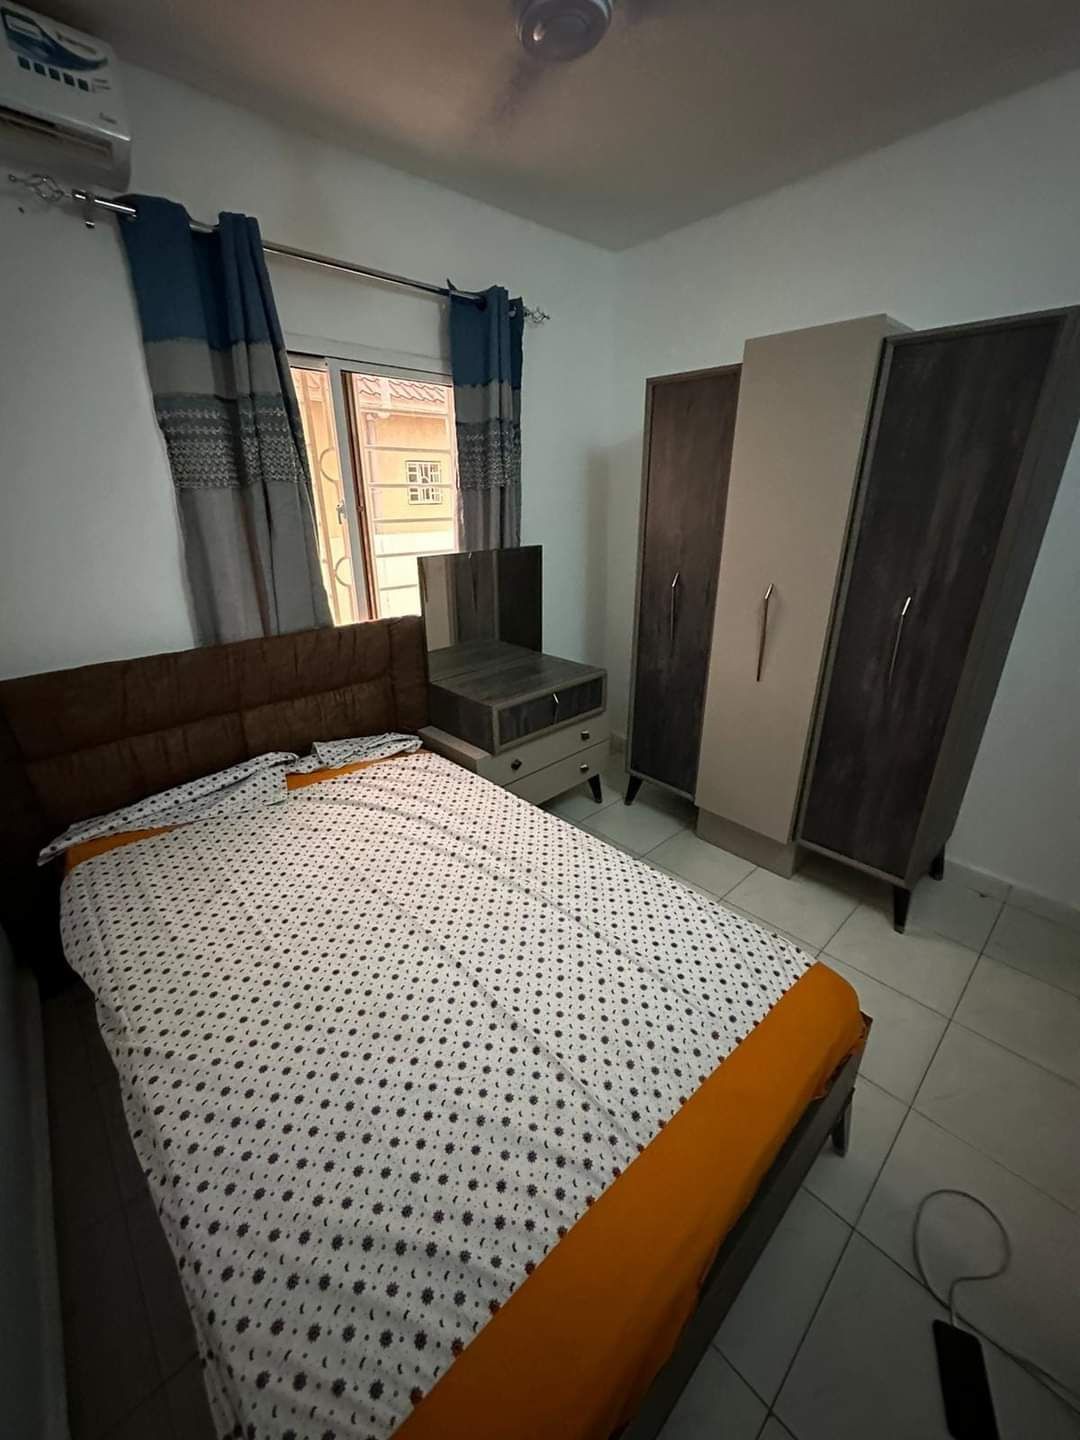 3 bedroom, free Wi-fi, Aircon & Hot water